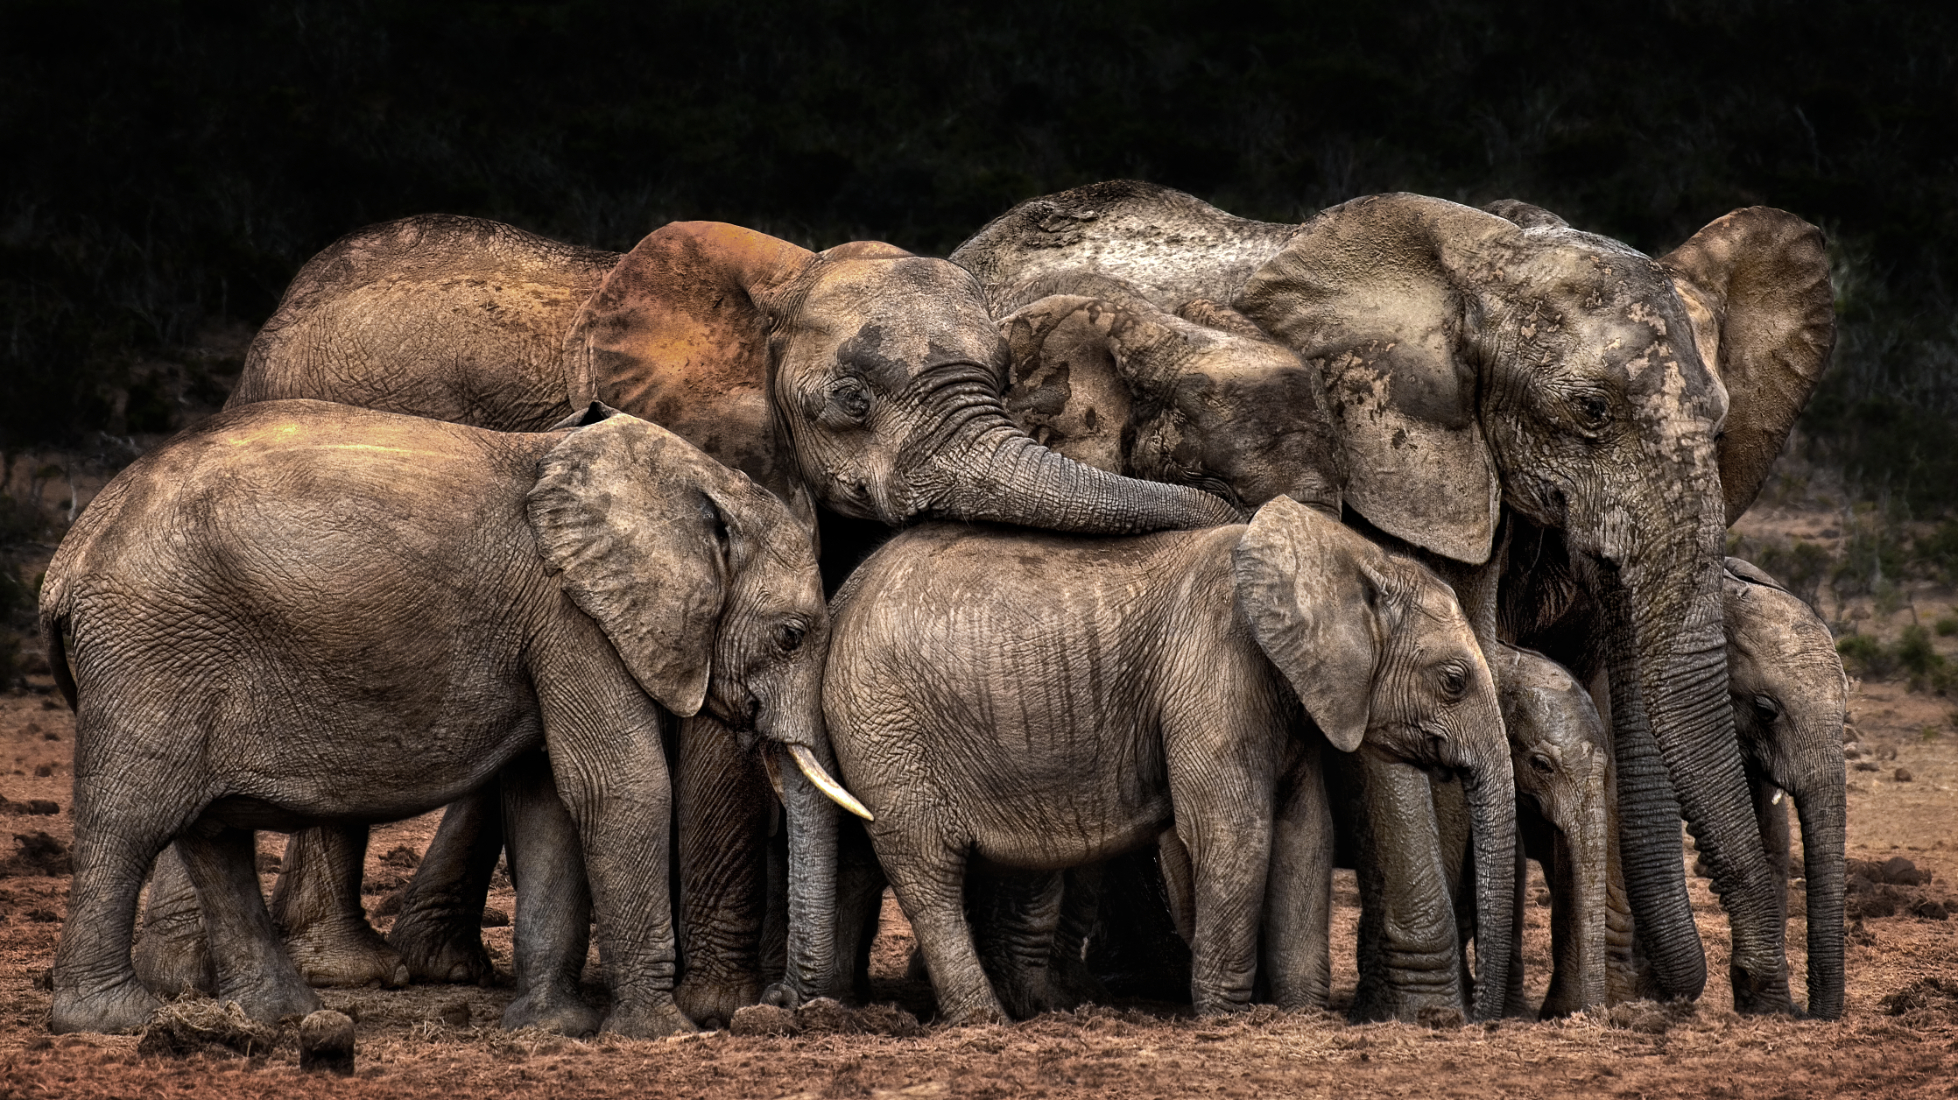 In South Africa, elephants old and young huddle together to keep each other safe, captured by Josef Schwarz from Germany